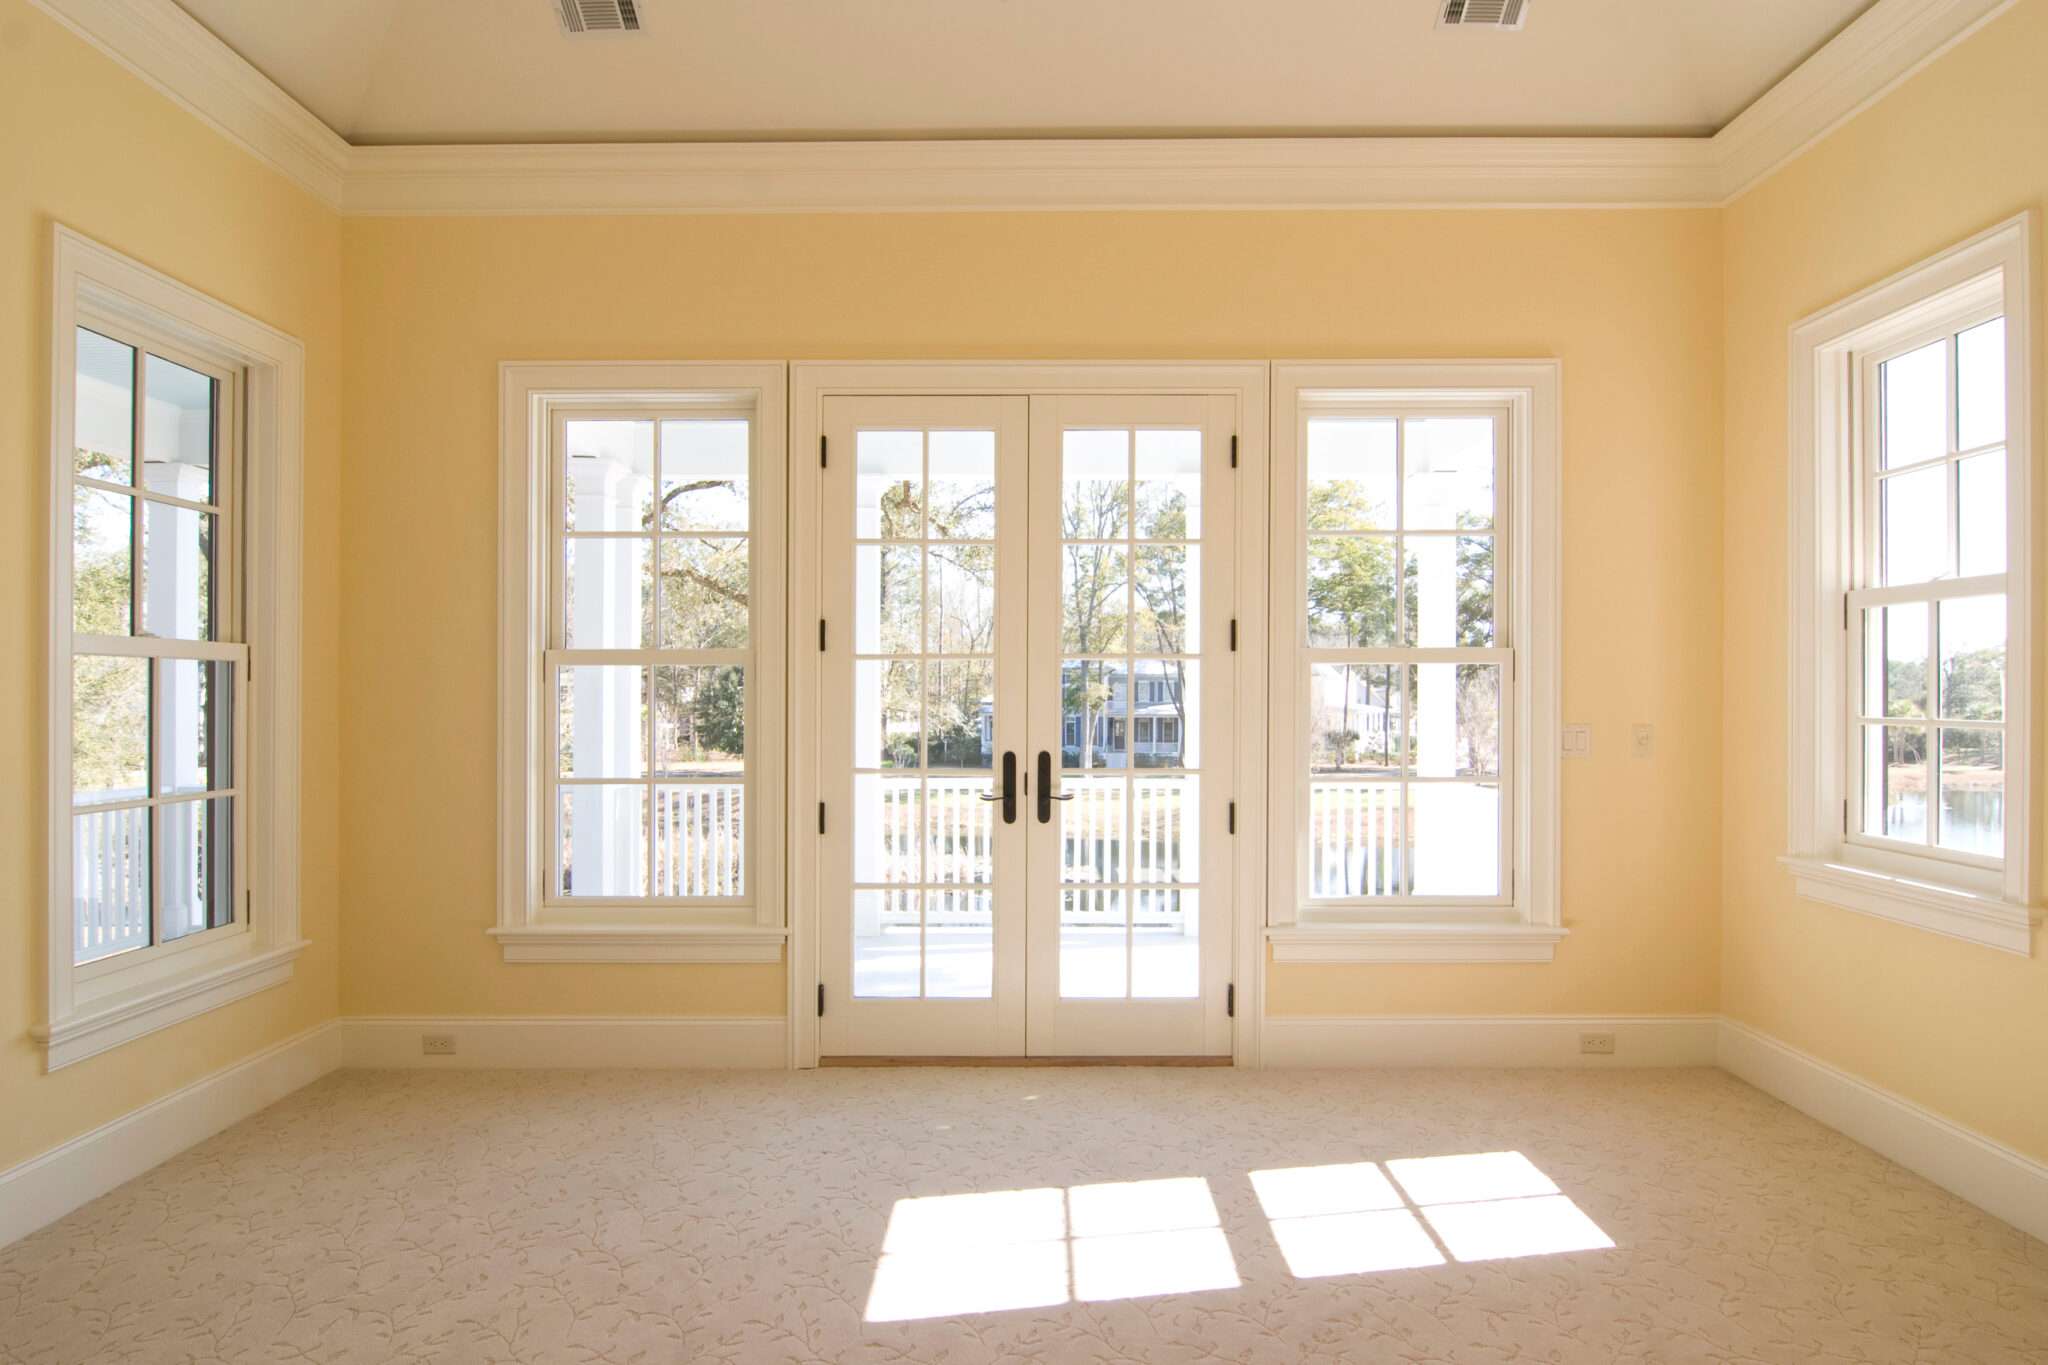 Patio doors and windows in empty room with yellow walls